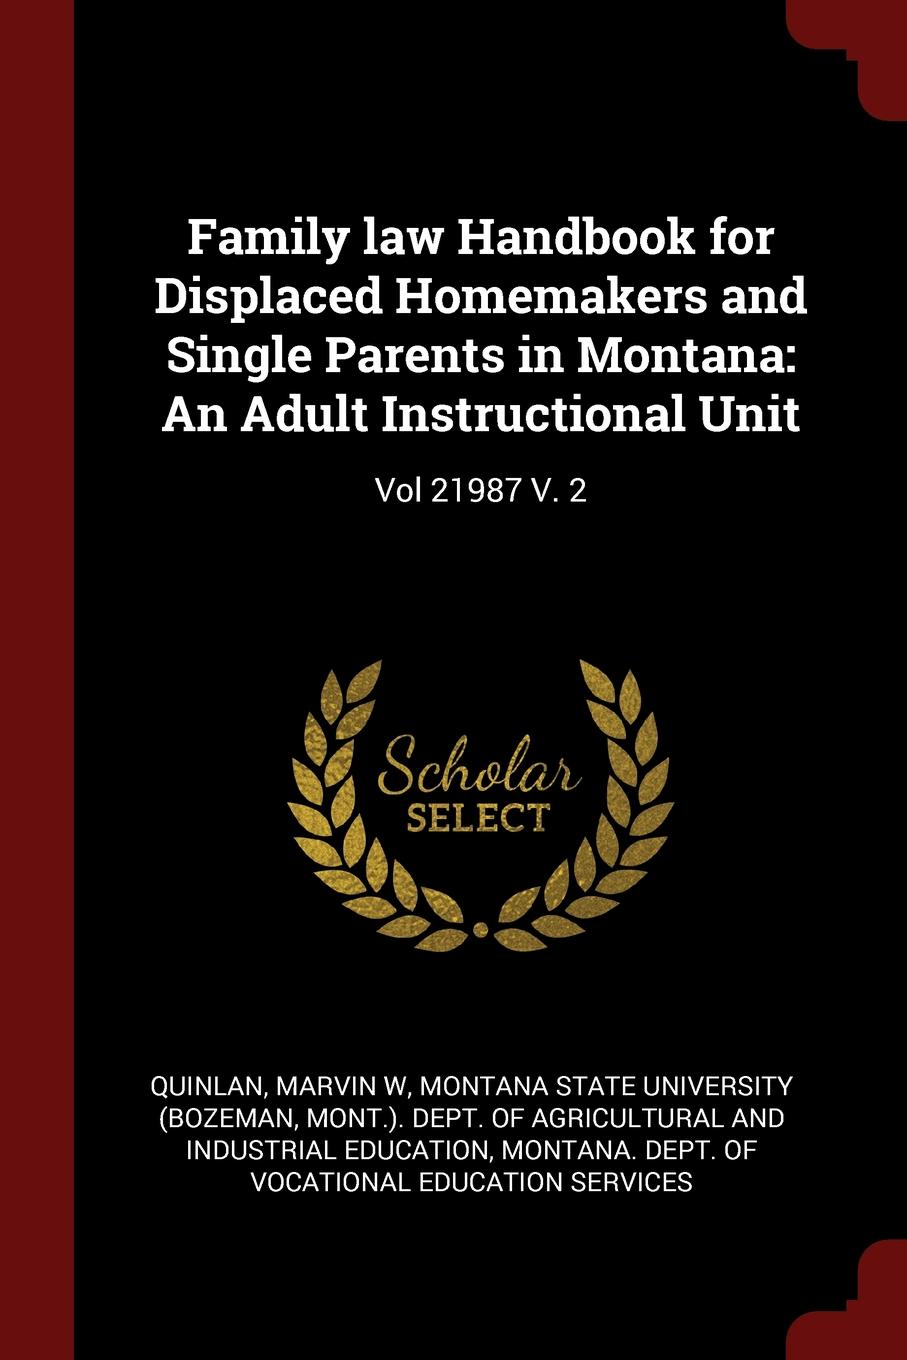 Family law Handbook for Displaced Homemakers and Single Parents in Montana. An Adult Instructional Unit: Vol 21987 V. 2